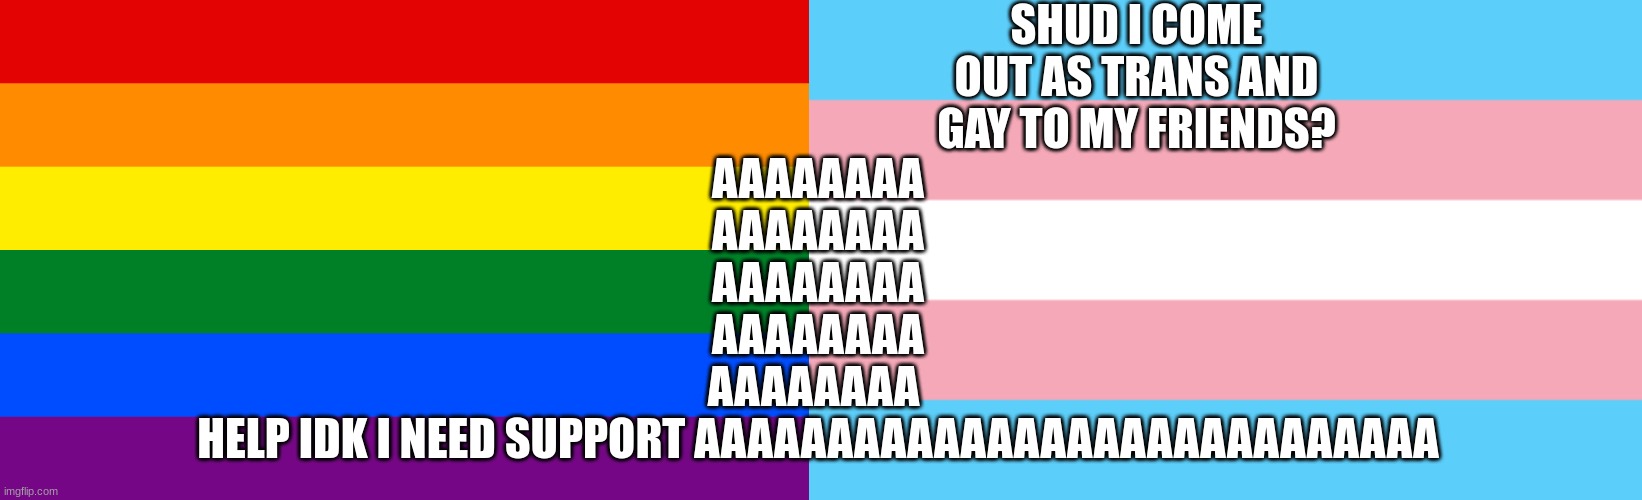 SHUD I COME OUT AS TRANS AND GAY TO MY FRIENDS? AAAAAAAA
AAAAAAAA
AAAAAAAA
AAAAAAAA
AAAAAAAA 
HELP IDK I NEED SUPPORT AAAAAAAAAAAAAAAAAAAAAAAAAAAA | image tagged in pride flag,trans flag | made w/ Imgflip meme maker